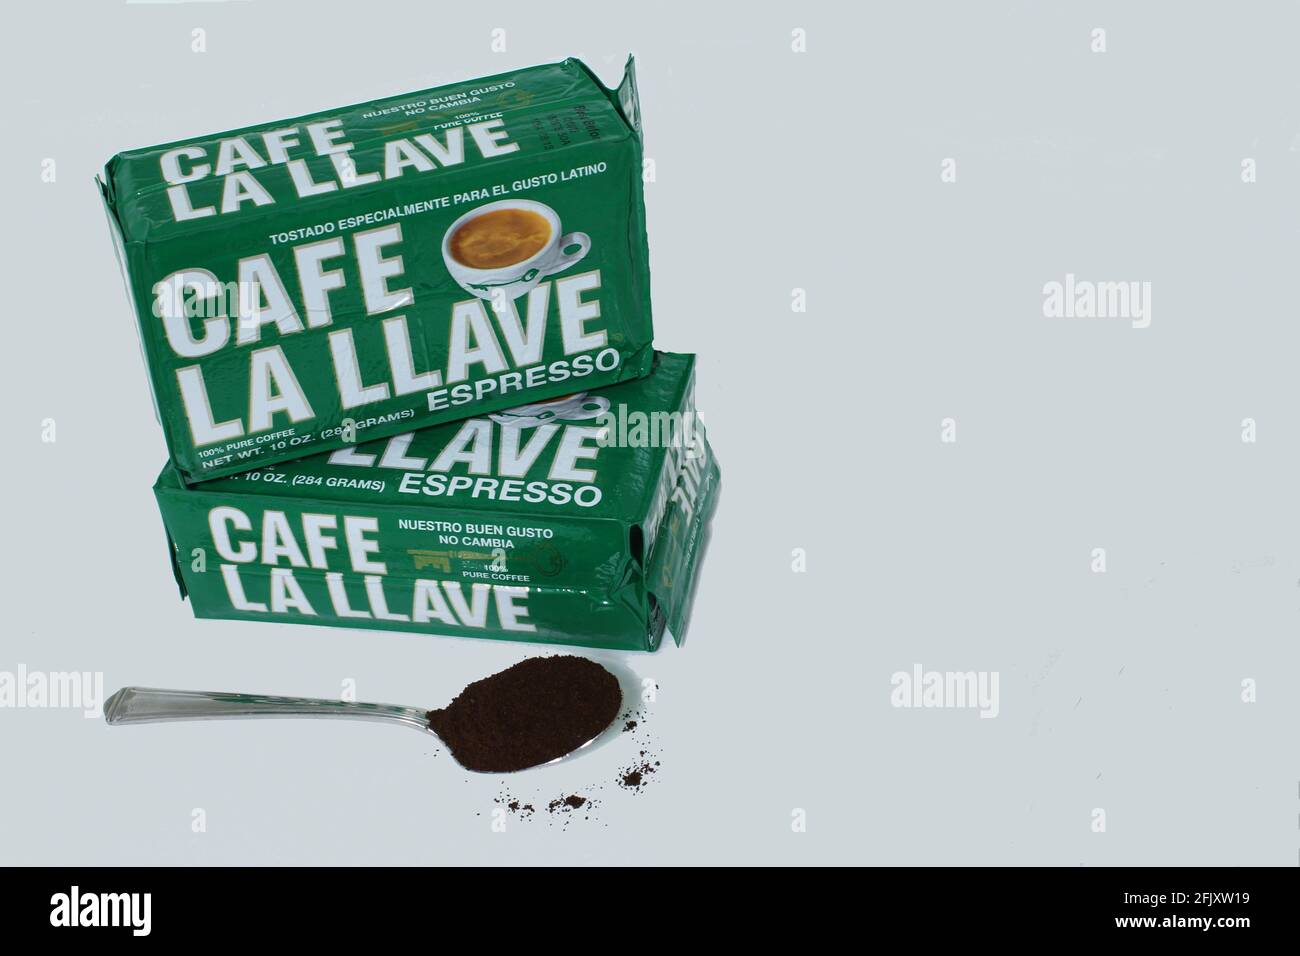 Cafe La Llave Cuban coffee in boxes and a spoon full of coffee grounds on a white background with copy space Stock Photo